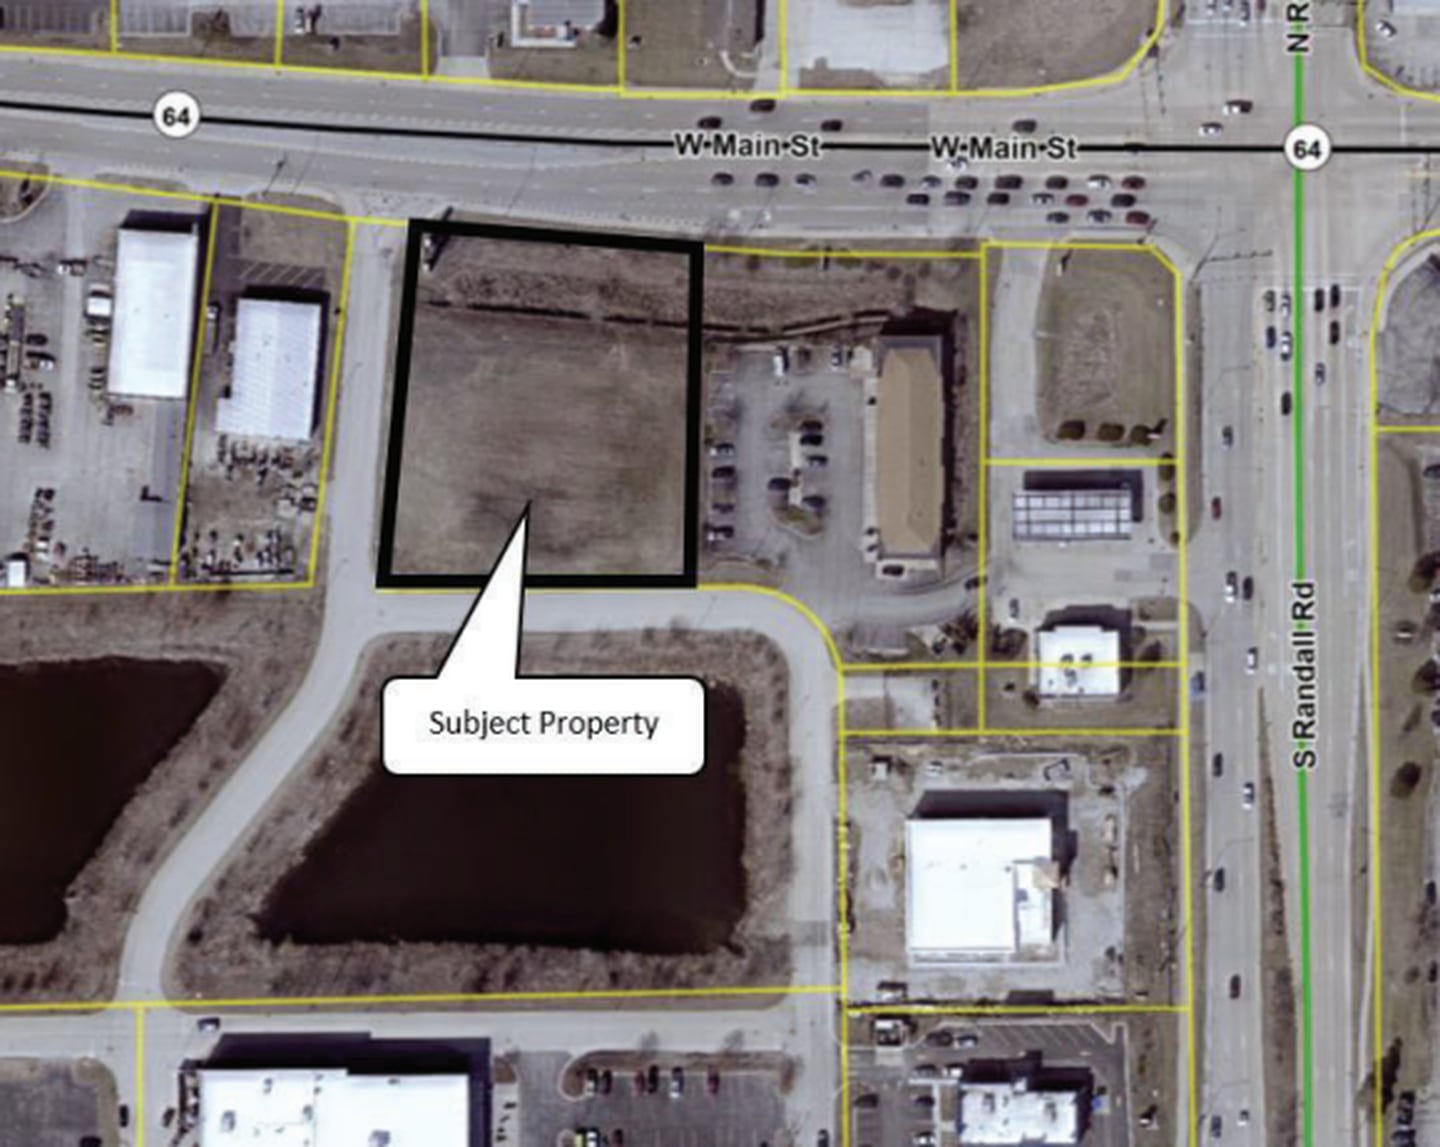 Site map for proposed River West Animal Hospital at 2377 W Main St. in St. Charles.